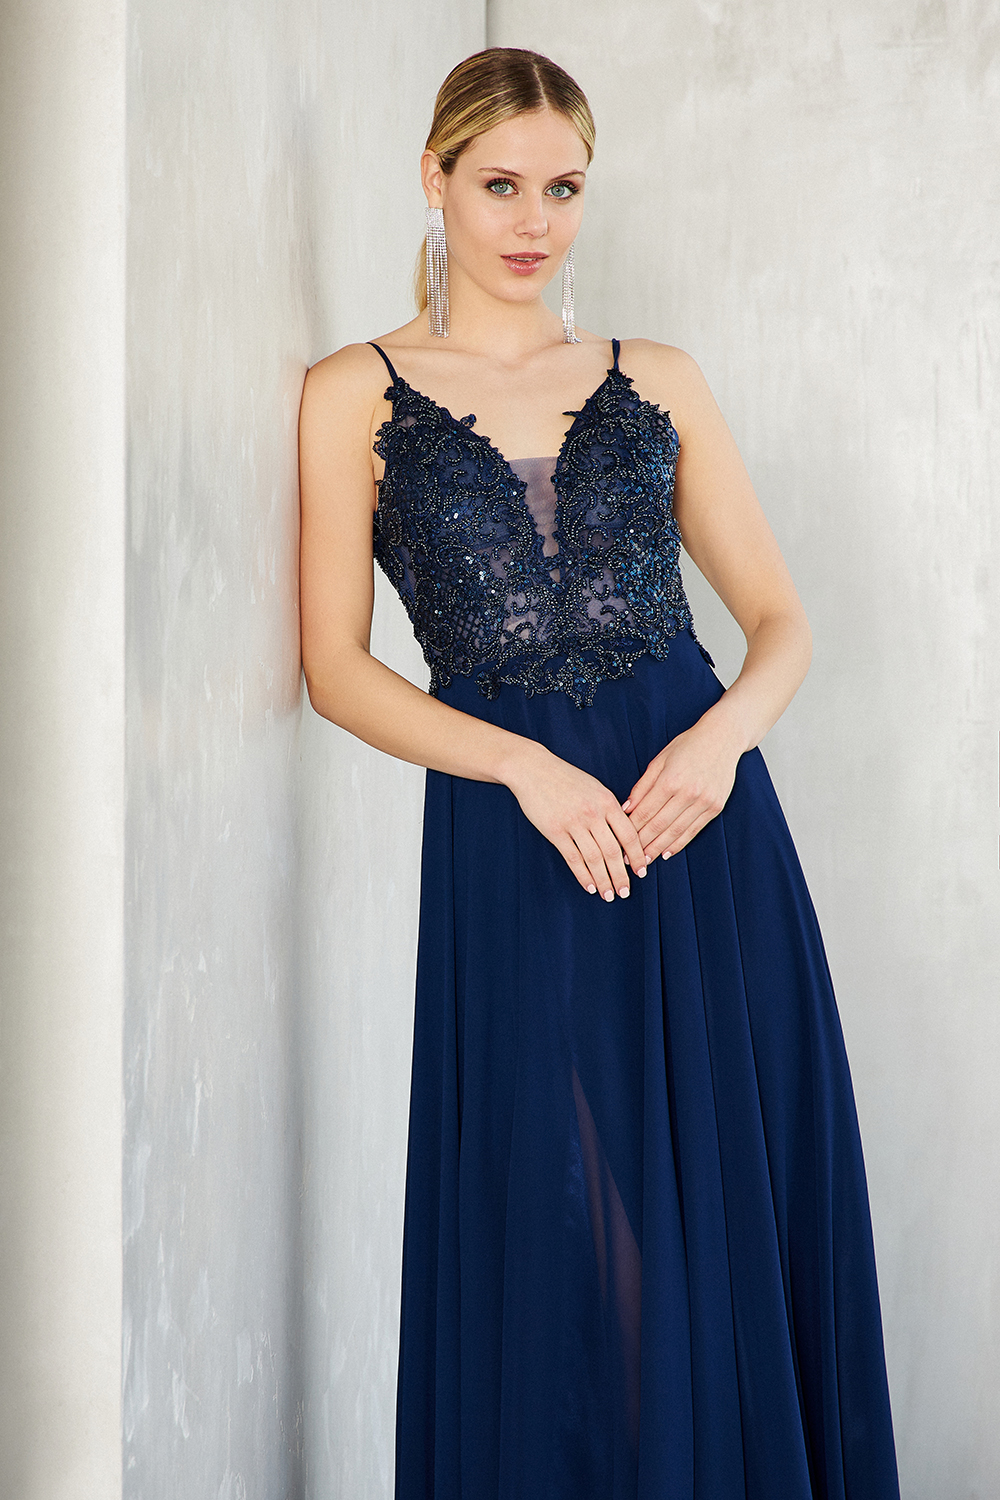 Long evening chiffon dress with beaded top, straps and open back